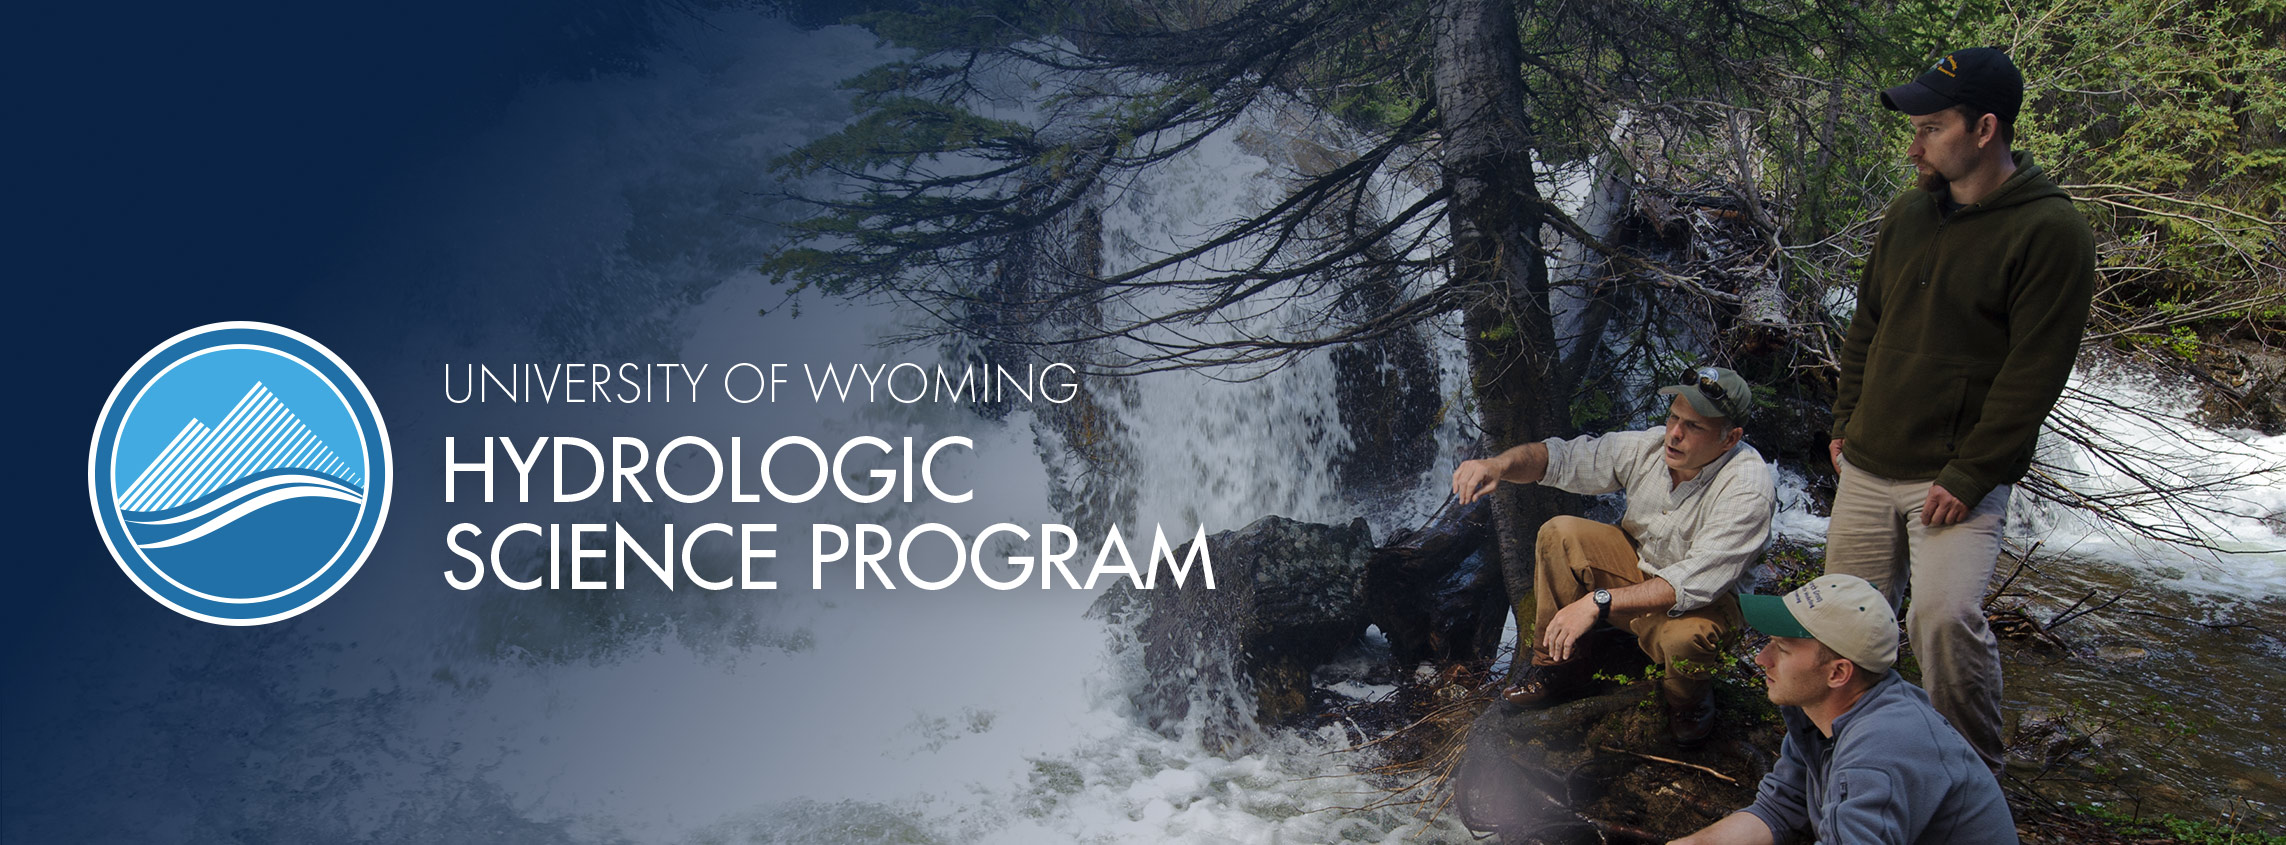 University of Wyoming Hydrologic Science Program logo over faculty and students by a river